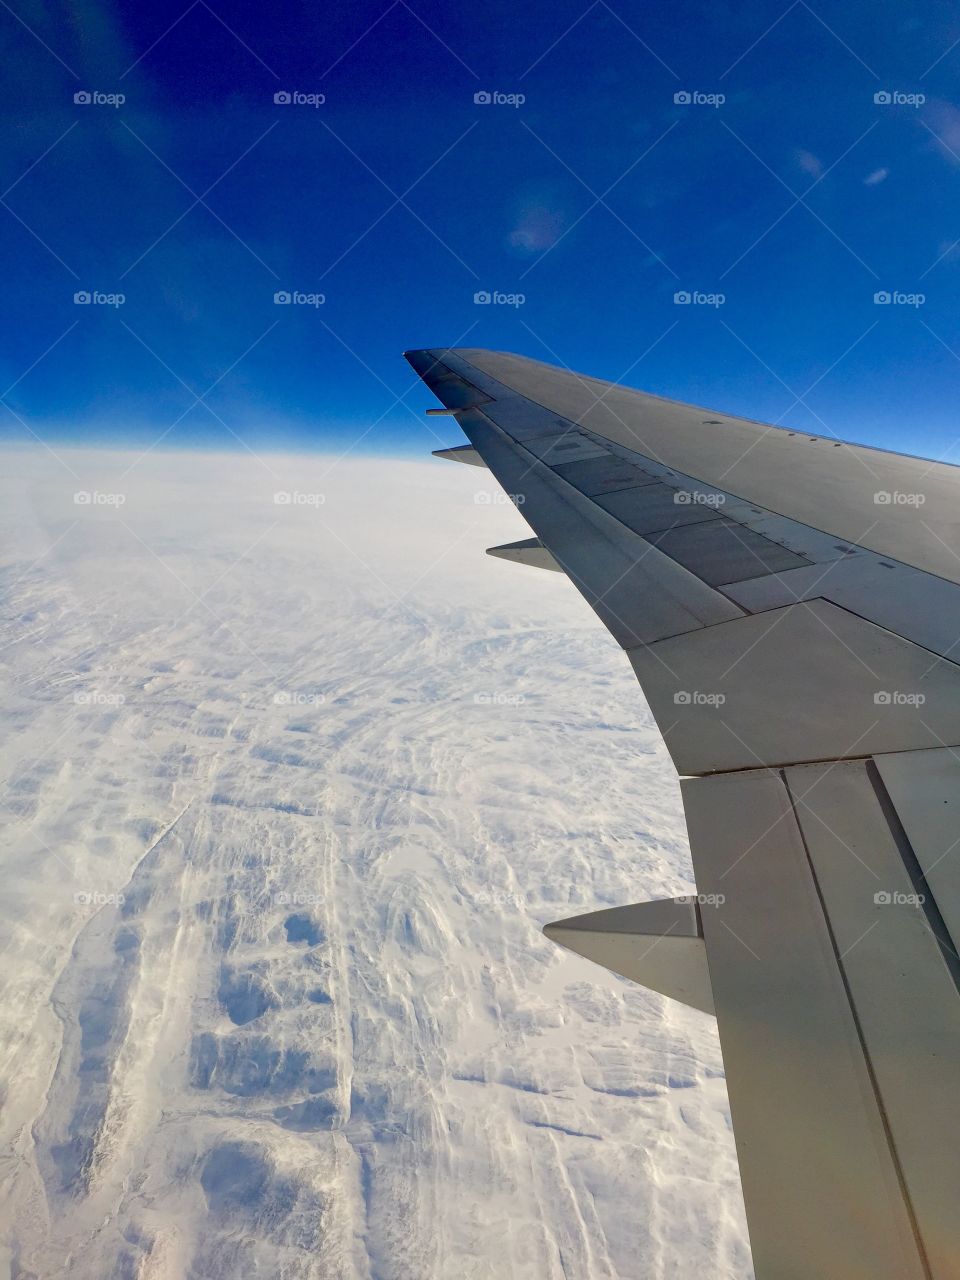 Flying over ice and snow